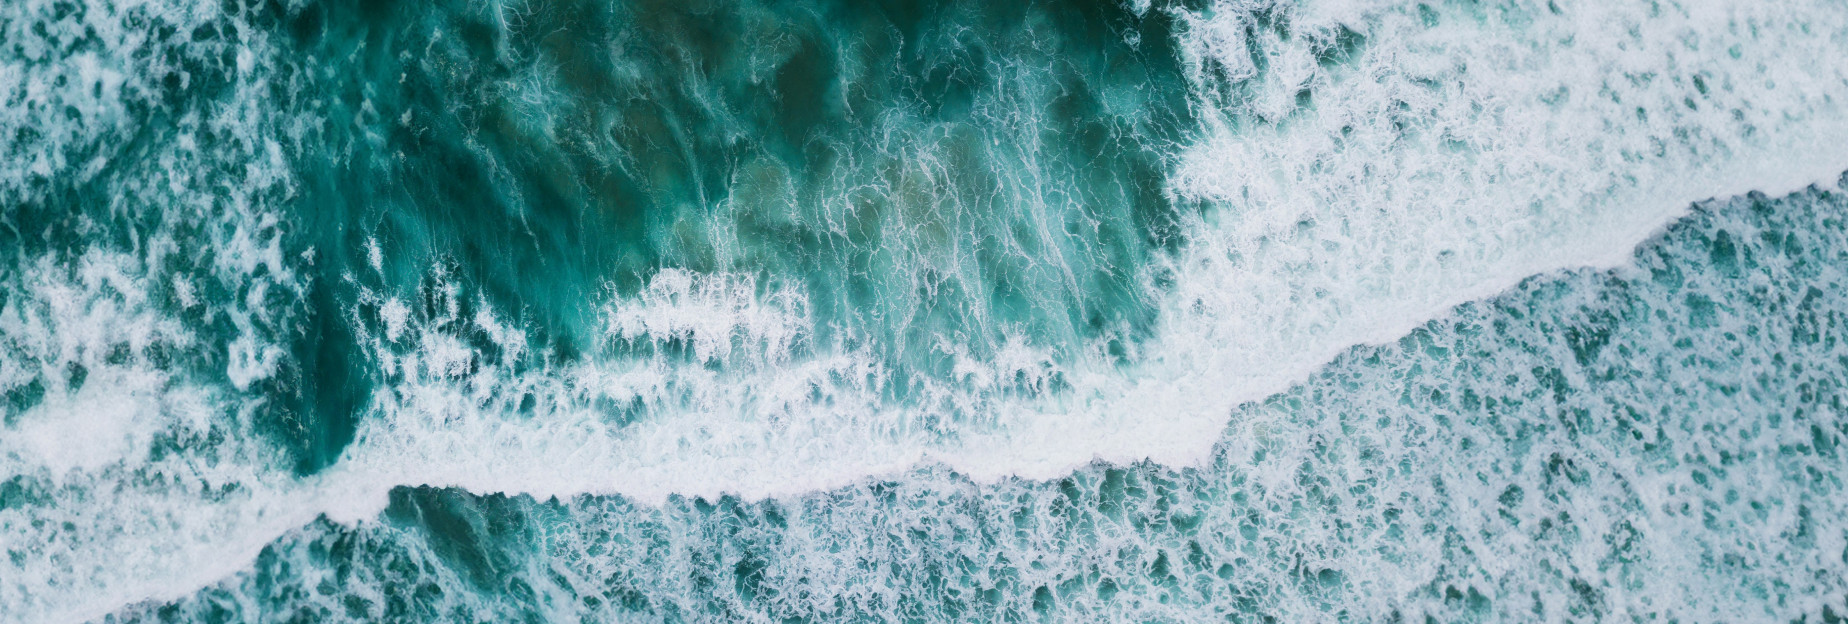 Aerial view capturing the hues of a blue-green ocean with rolling waves.